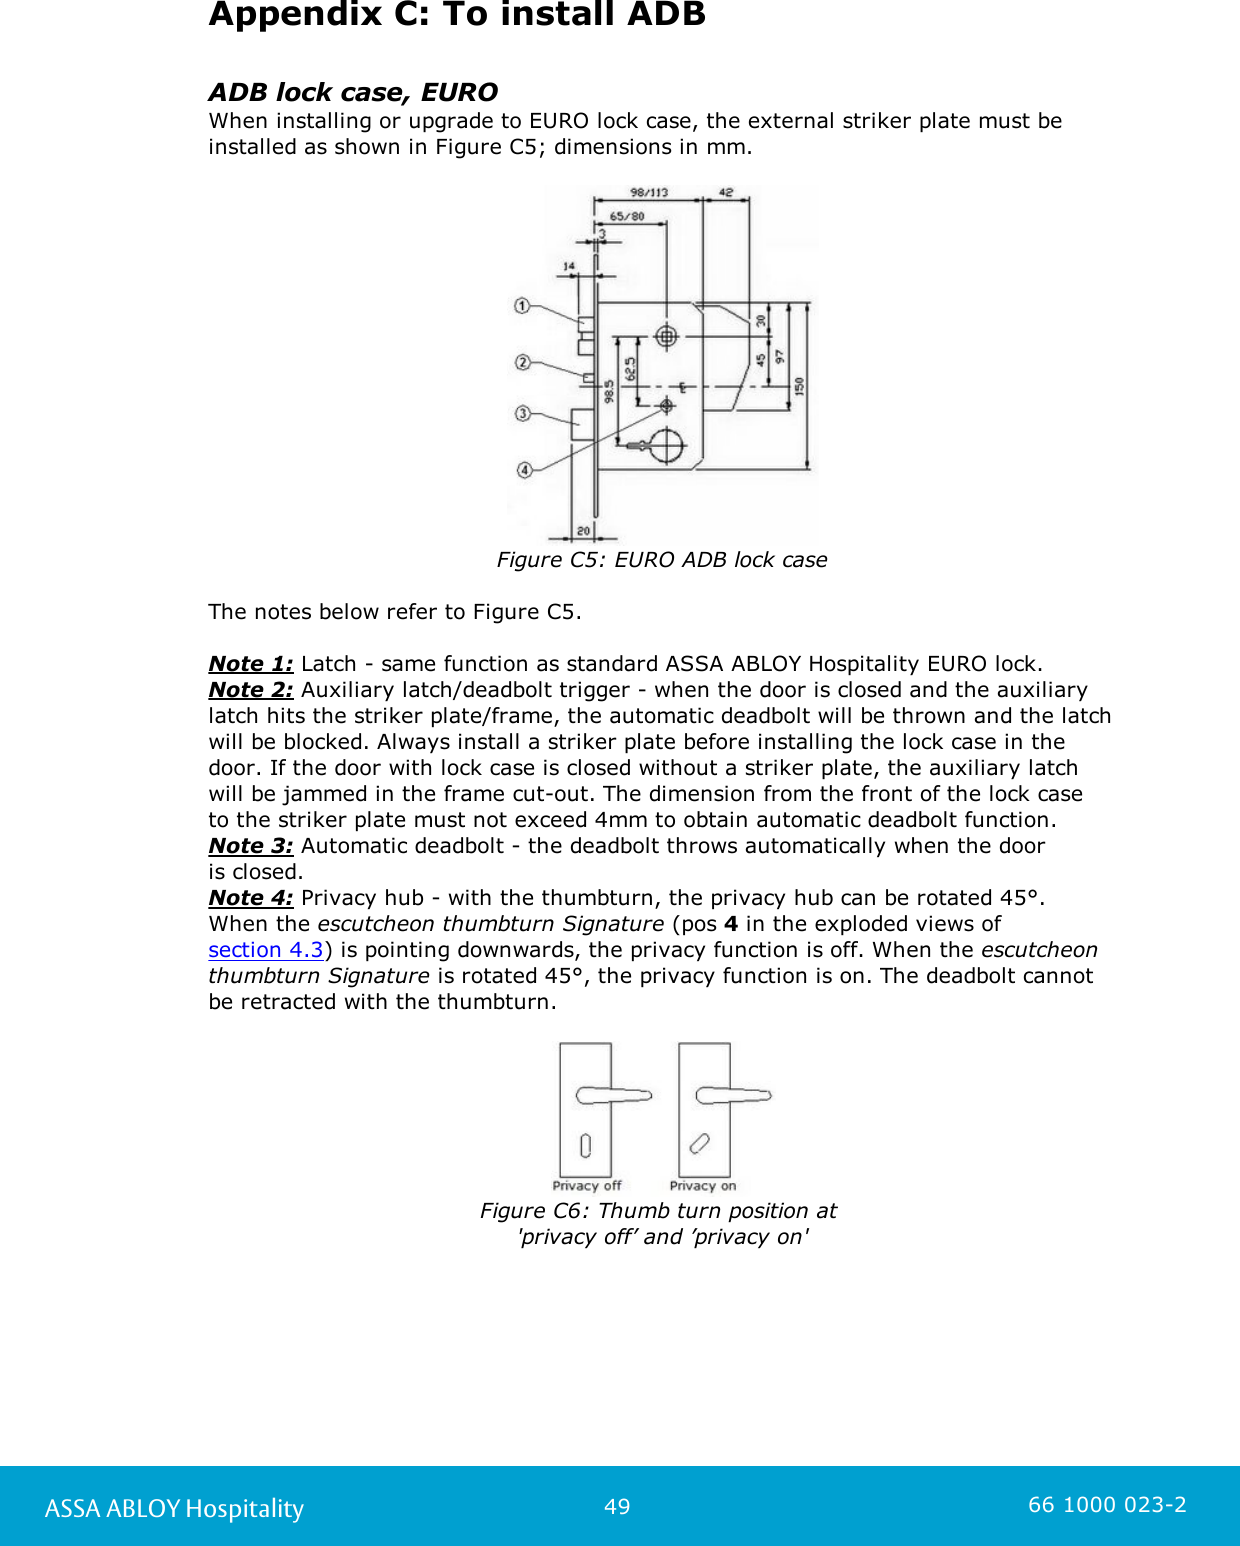 49ASSA ABLOY Hospitality 66 1000 023-2Appendix C: To install ADBADB lock case, EUROWhen installing or upgrade to EURO lock case, the external striker plate must beinstalled as shown in Figure C5; dimensions in mm.Figure C5: EURO ADB lock caseThe notes below refer to Figure C5.Note 1: Latch - same function as standard ASSA ABLOY Hospitality EURO lock. Note 2: Auxiliary latch/deadbolt trigger - when the door is closed and the auxiliarylatch hits the striker plate/frame, the automatic deadbolt will be thrown and the latchwill be blocked. Always install a striker plate before installing the lock case in thedoor. If the door with lock case is closed without a striker plate, the auxiliary latchwill be jammed in the frame cut-out. The dimension from the front of the lock case to the striker plate must not exceed 4mm to obtain automatic deadbolt function. Note 3: Automatic deadbolt - the deadbolt throws automatically when the door is closed. Note 4: Privacy hub - with the thumbturn, the privacy hub can be rotated 45°. When the escutcheon thumbturn Signature (pos 4 in the exploded views of section 4.3) is pointing downwards, the privacy function is off. When the escutcheonthumbturn Signature is rotated 45°, the privacy function is on. The deadbolt cannotbe retracted with the thumbturn.Figure C6: Thumb turn position at &apos;privacy off’ and ’privacy on&apos;